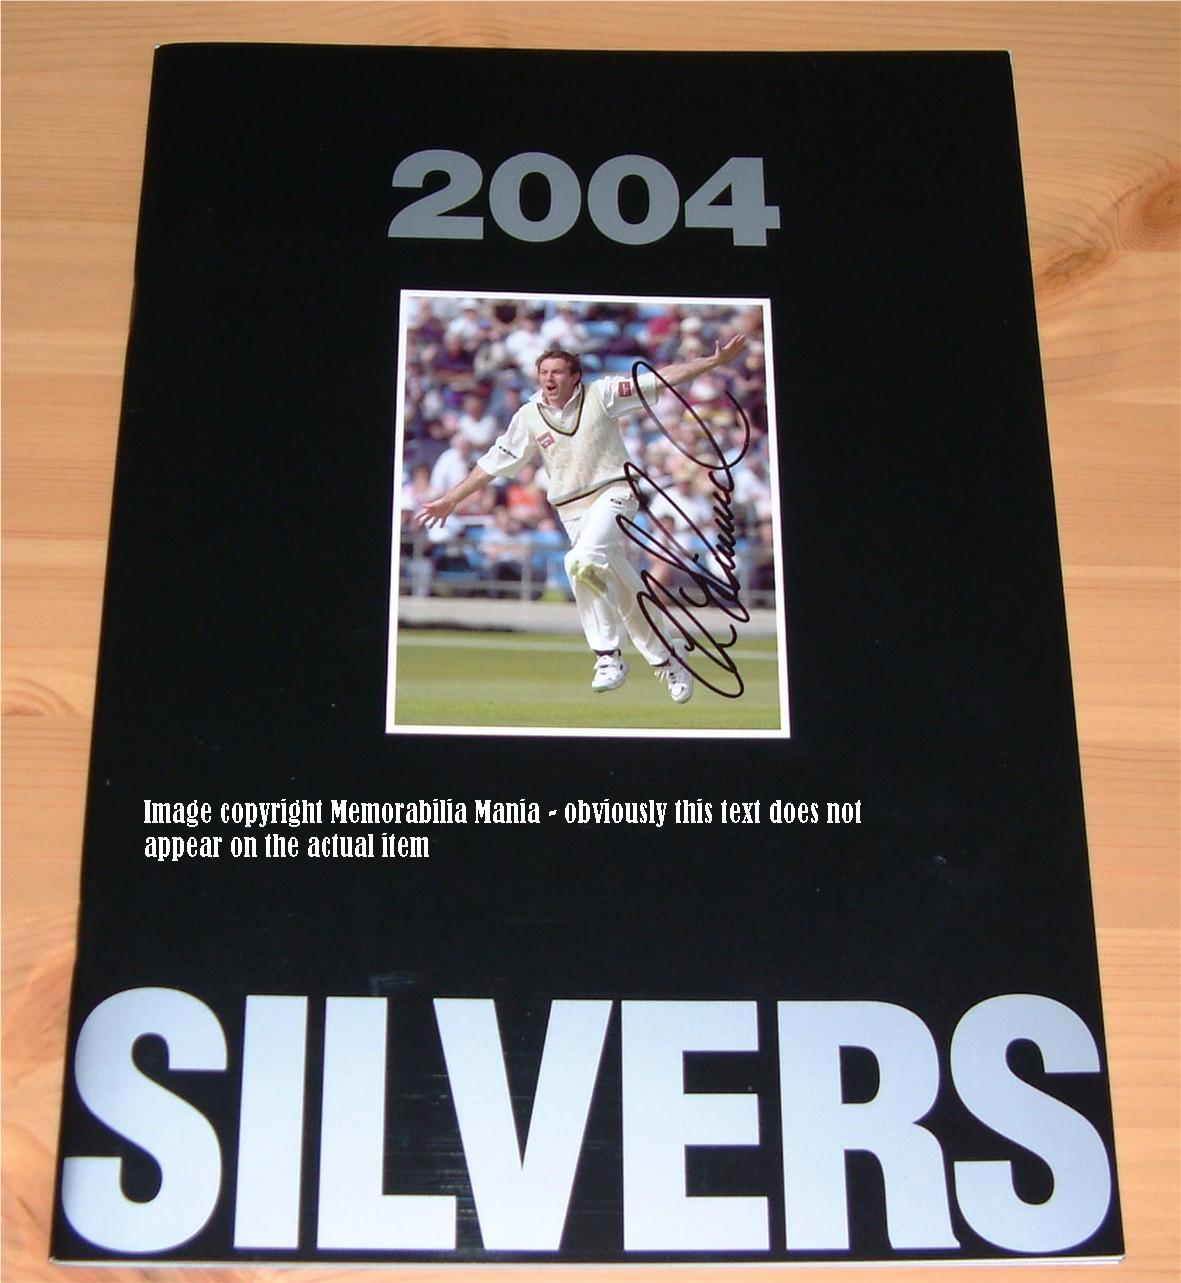 Signed by the Yorkshire bowler on the front cover. Also signed inside by Dickie Bird. COA -